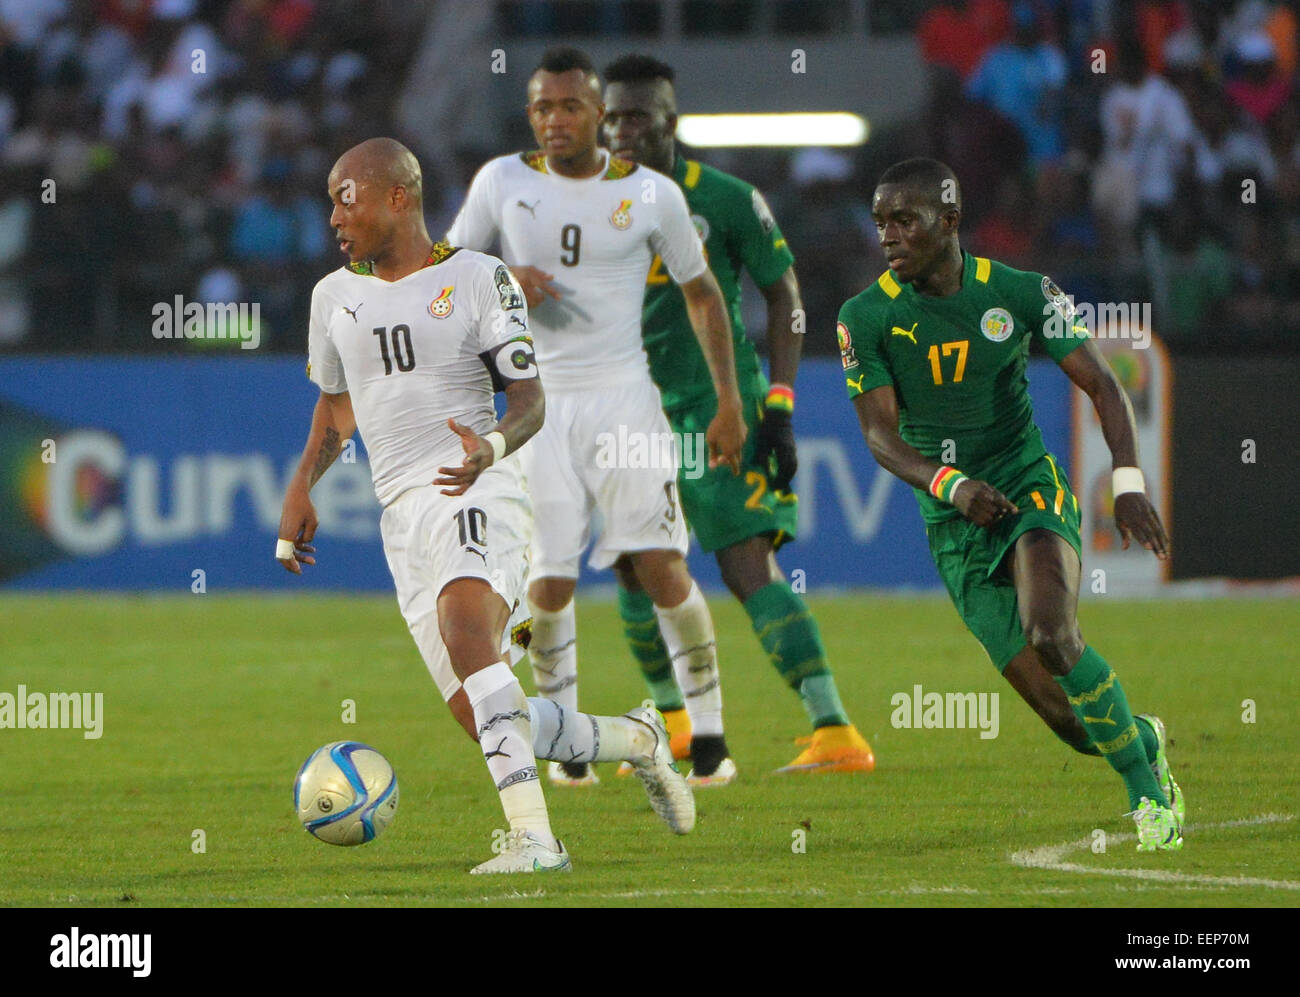 Mongomo, Equatorial Guinea. 19th Jan, 2015. African Cup of Nation football tournament. Ghana versus Senegal. Andre Ayew (GHA) challenged by Idrissa Gana Gueye (SEN) © Action Plus Sports/Alamy Live News Stock Photo